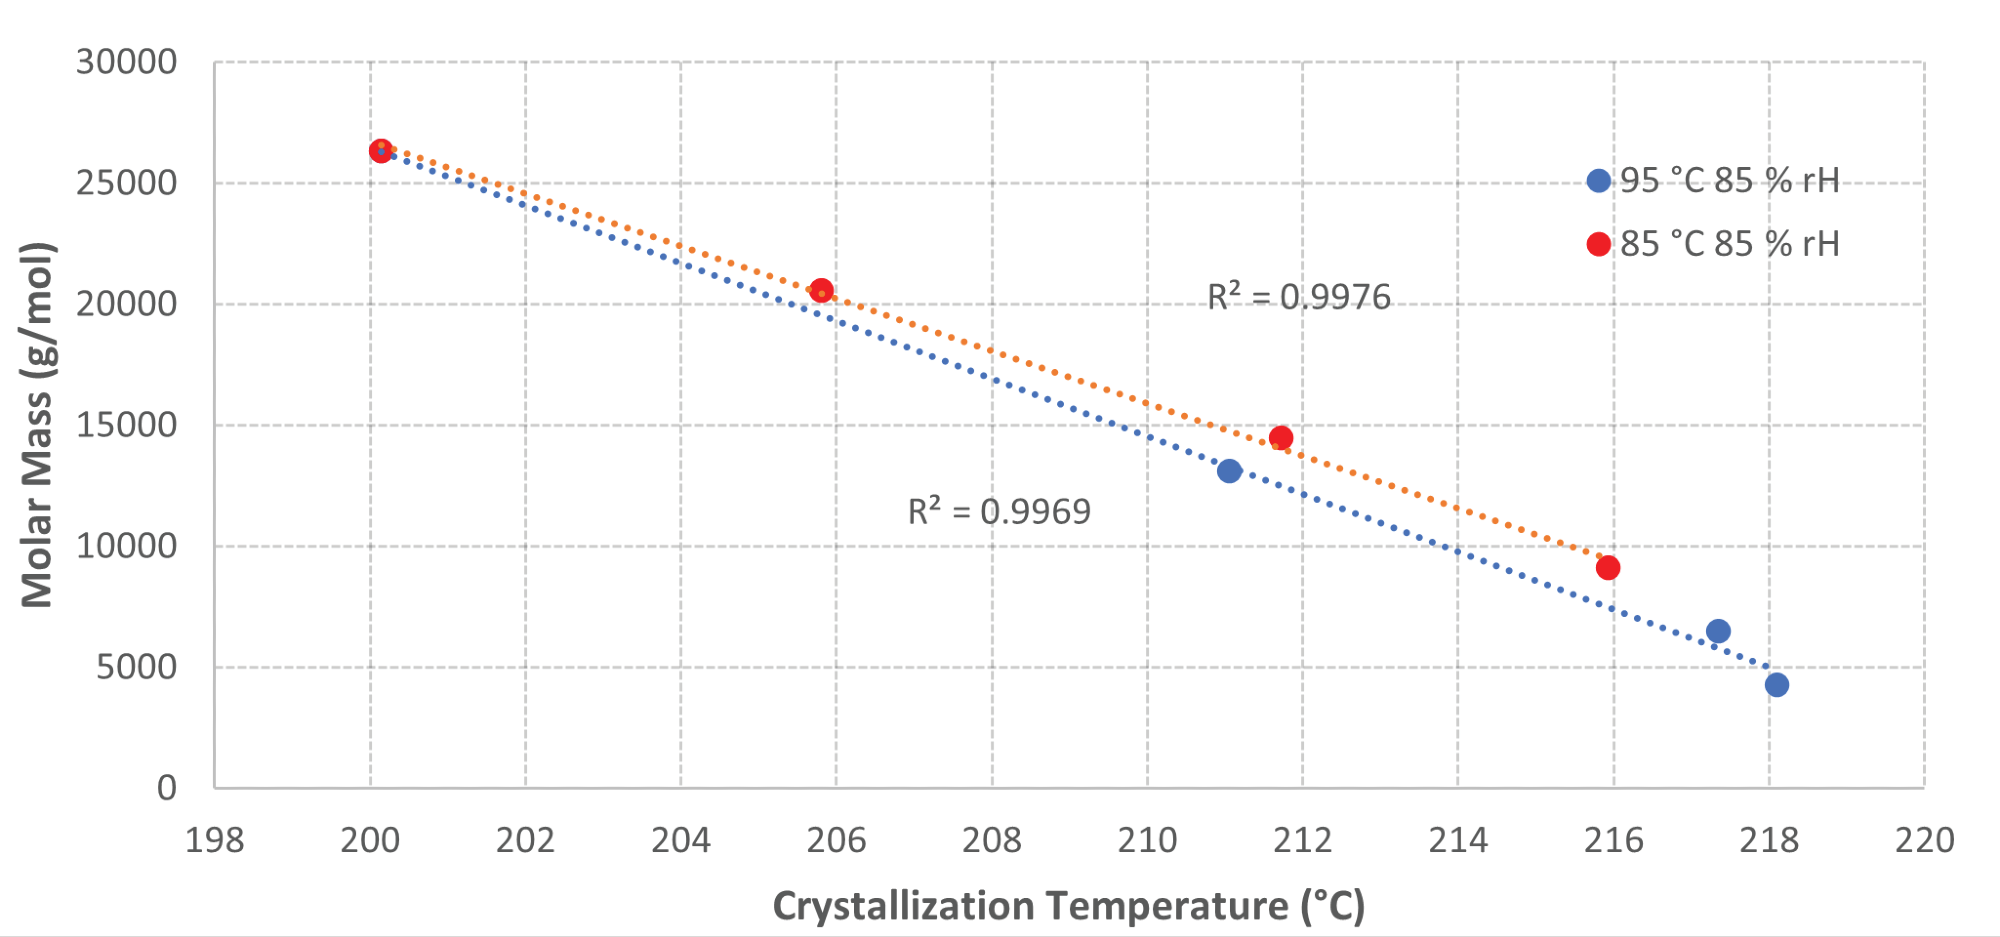 Graph of Molar Mass vs Crystallization Temperature for samples aged at elevated temperatures and humidity